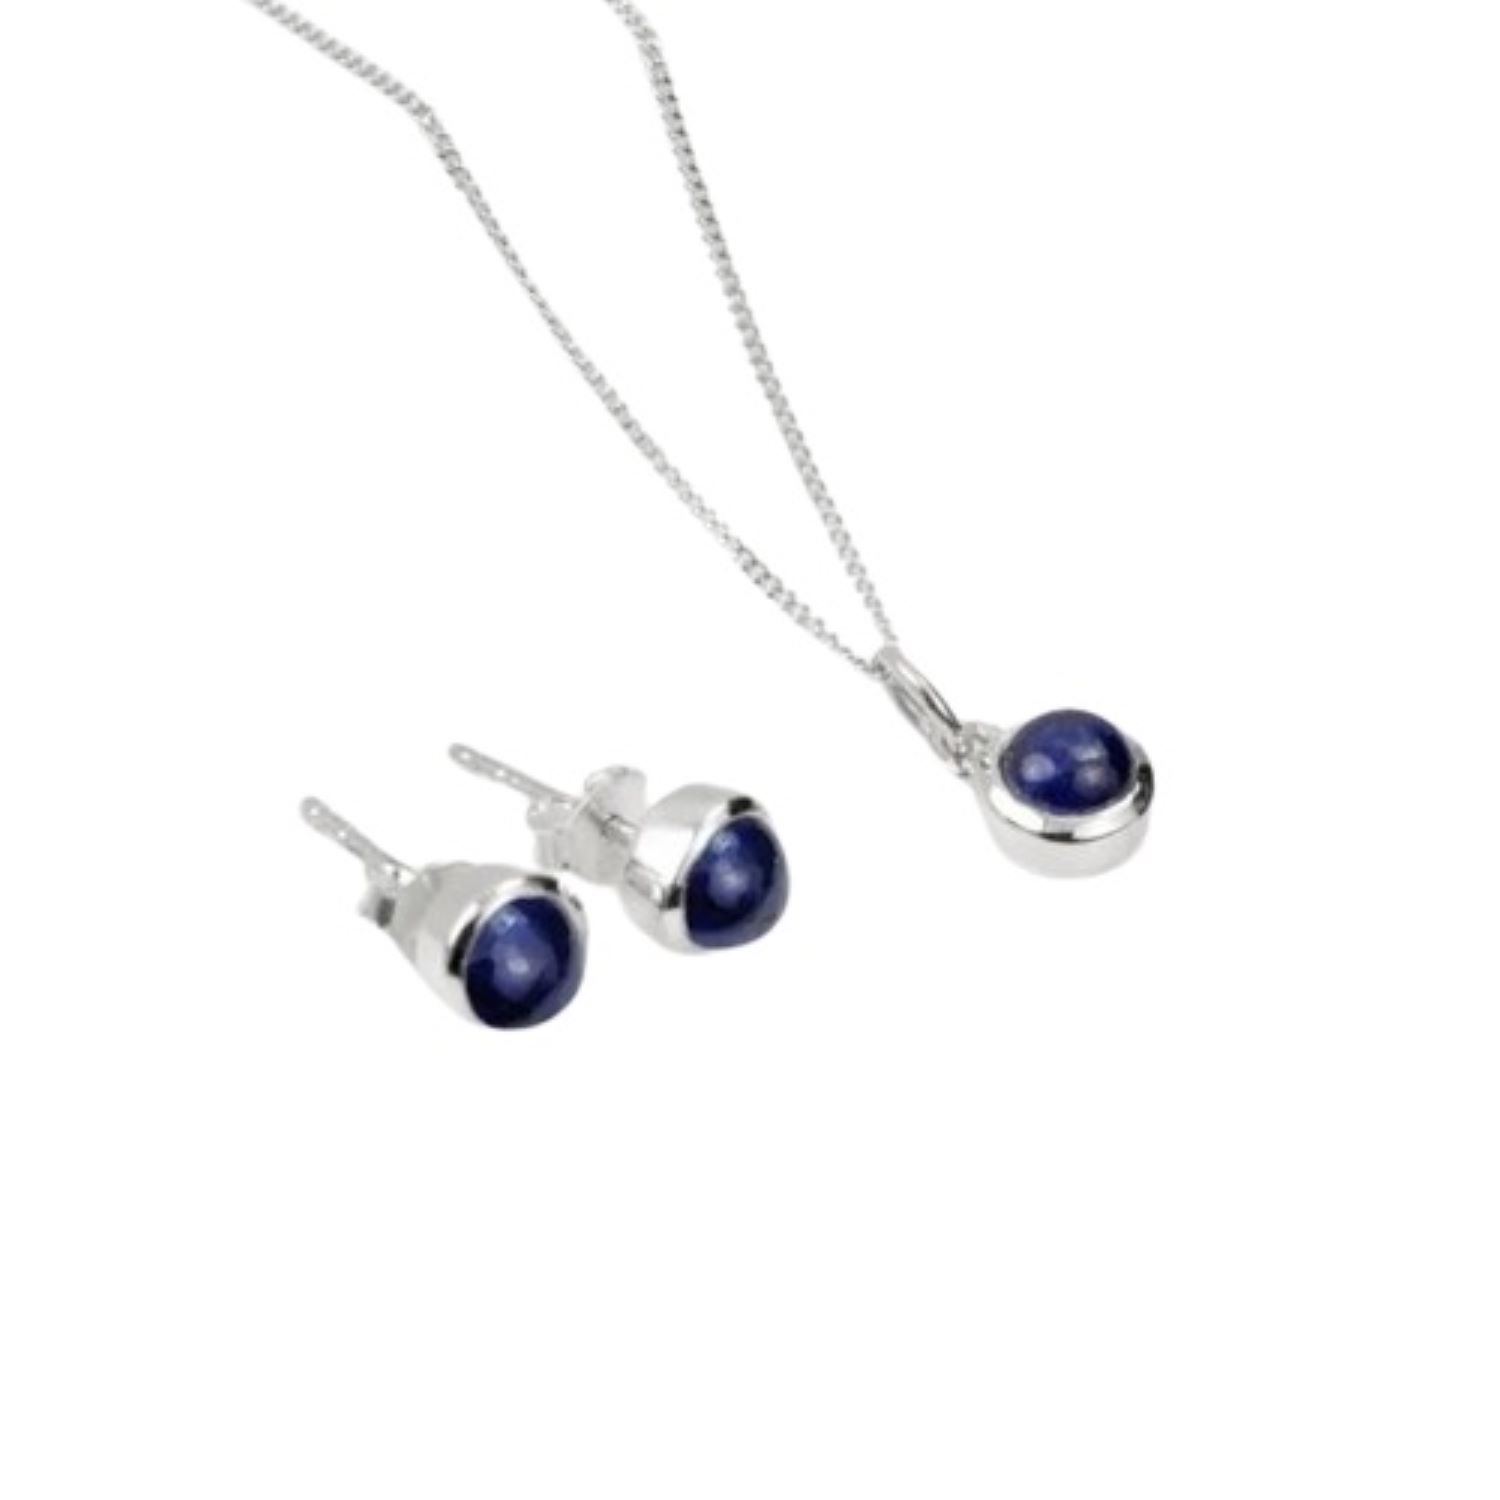 Women’s Silver / Blue September Birthstone Jewellery Set In Sterling Silver - Blue Sapphire Studs And Charm Necklace The Jewellery Store London